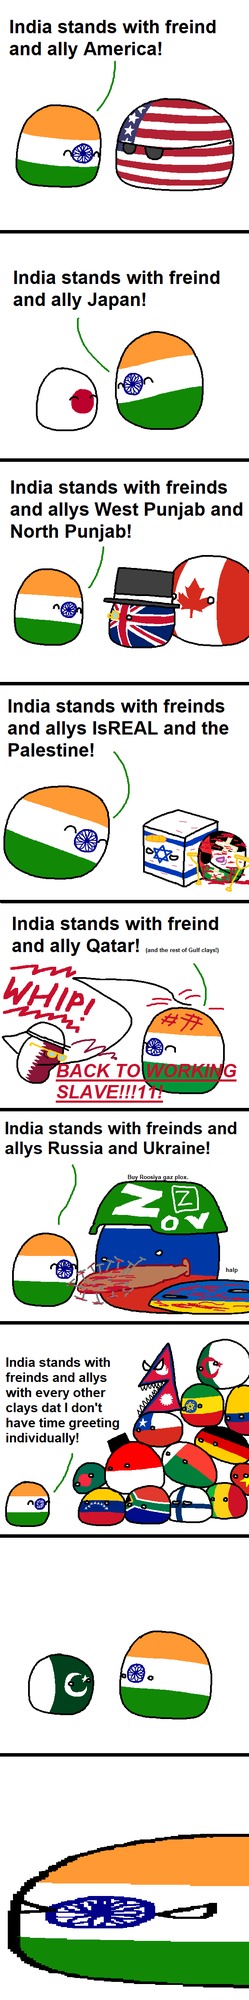 Made by Onterribruh in r/polandball (idk how to make the image larger) - meme